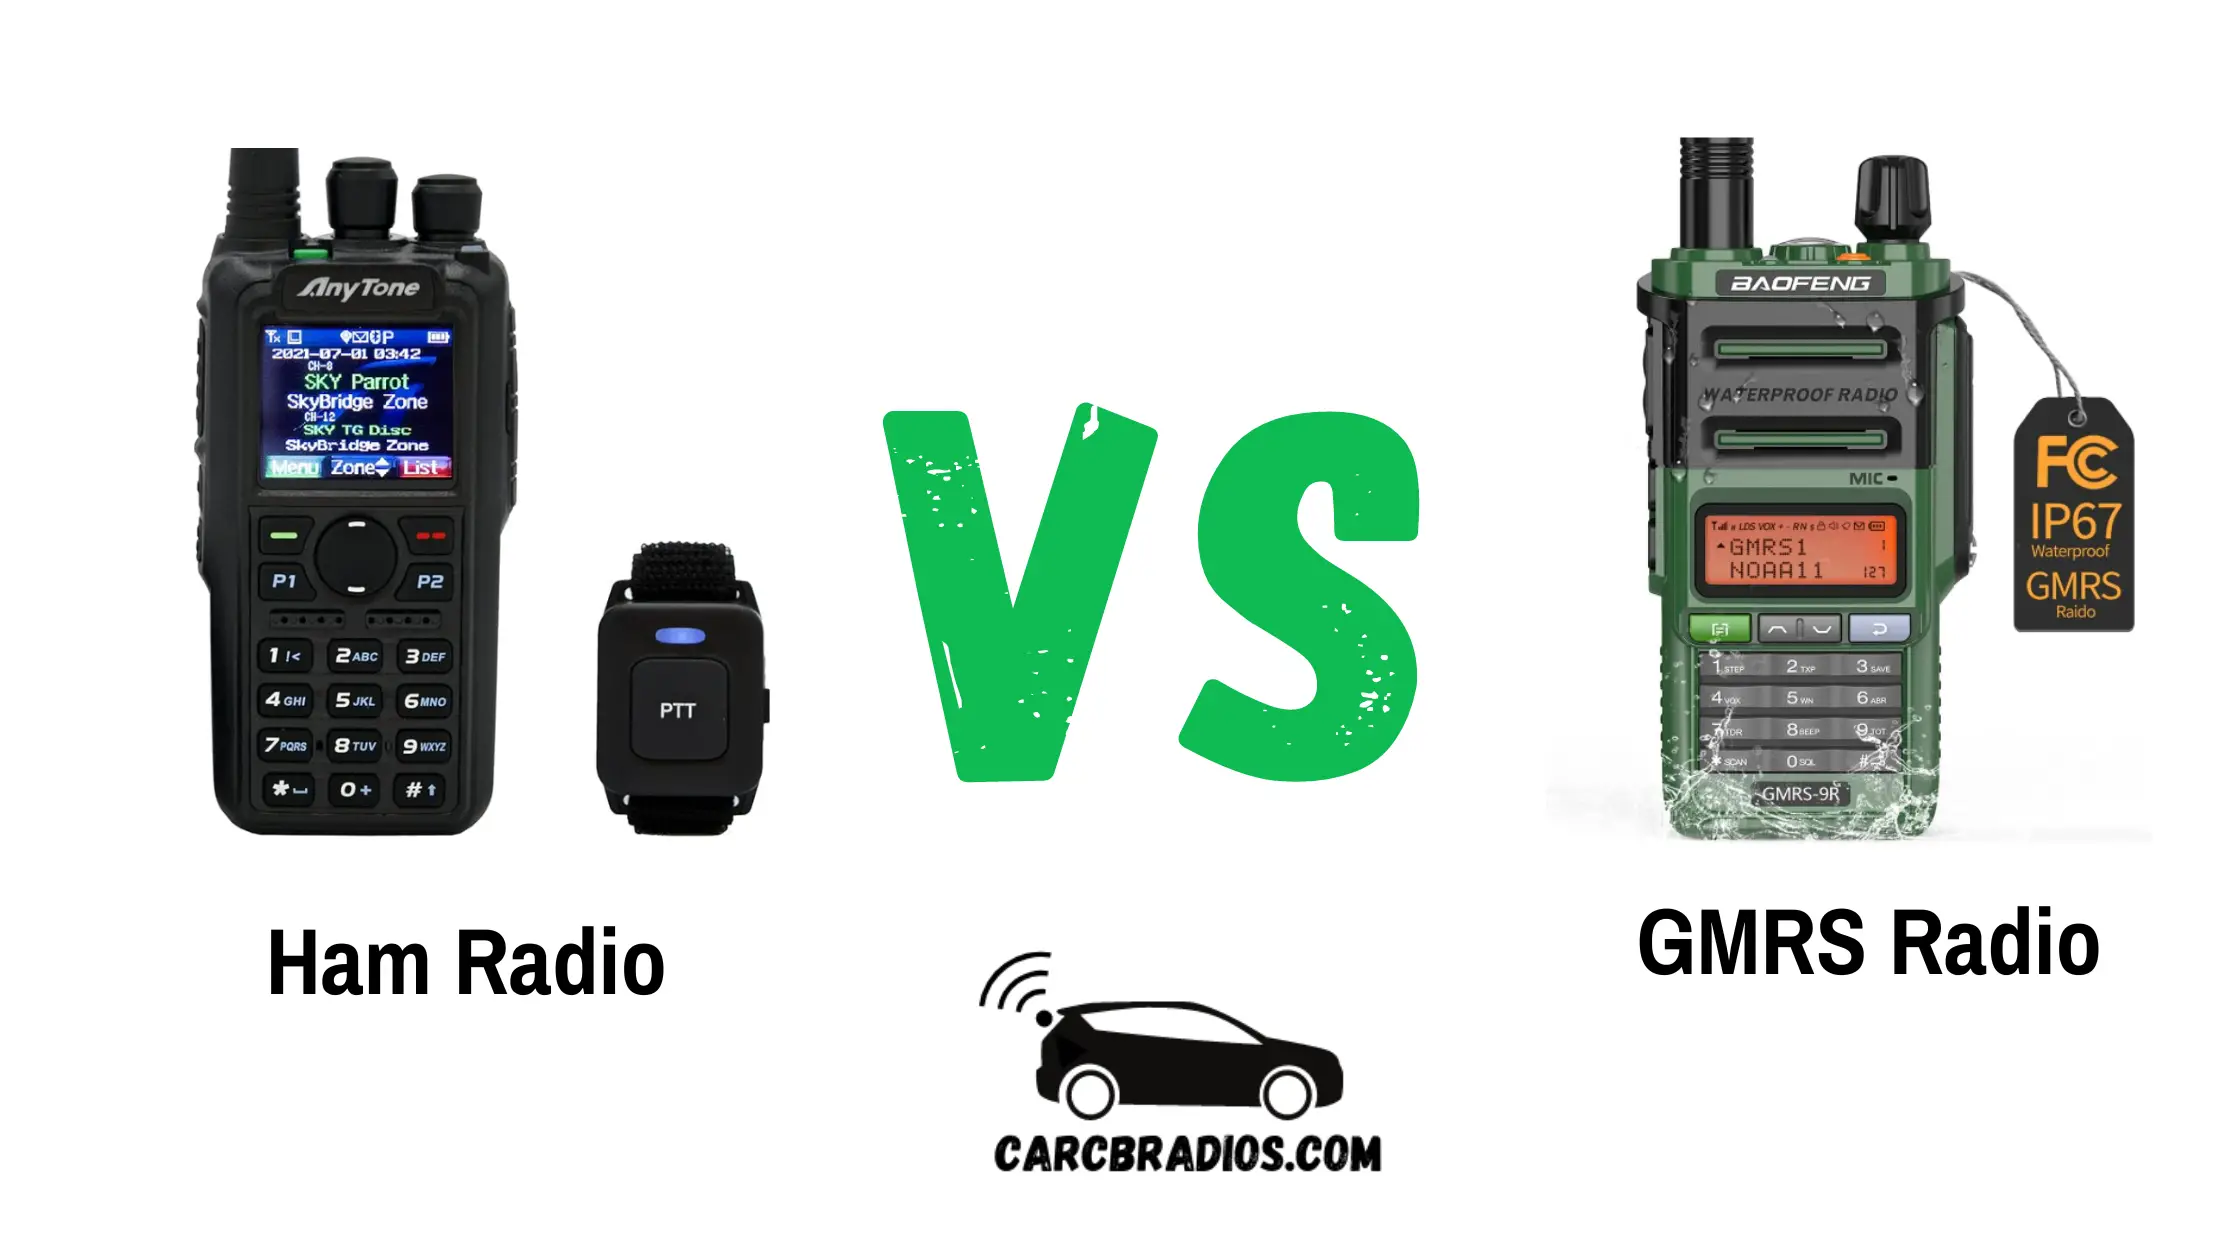 As a communication enthusiast, I have always been fascinated by the various methods of transmitting and receiving information over the airwaves. Two popular options for long-range communication are Ham Radio and GMRS (General Mobile Radio Service). Both of these radio services have their own unique characteristics, advantages, and disadvantages. In this article, I will provide an overview of Ham Radio and GMRS, compare their differences, and help you decide which one is best for your needs.